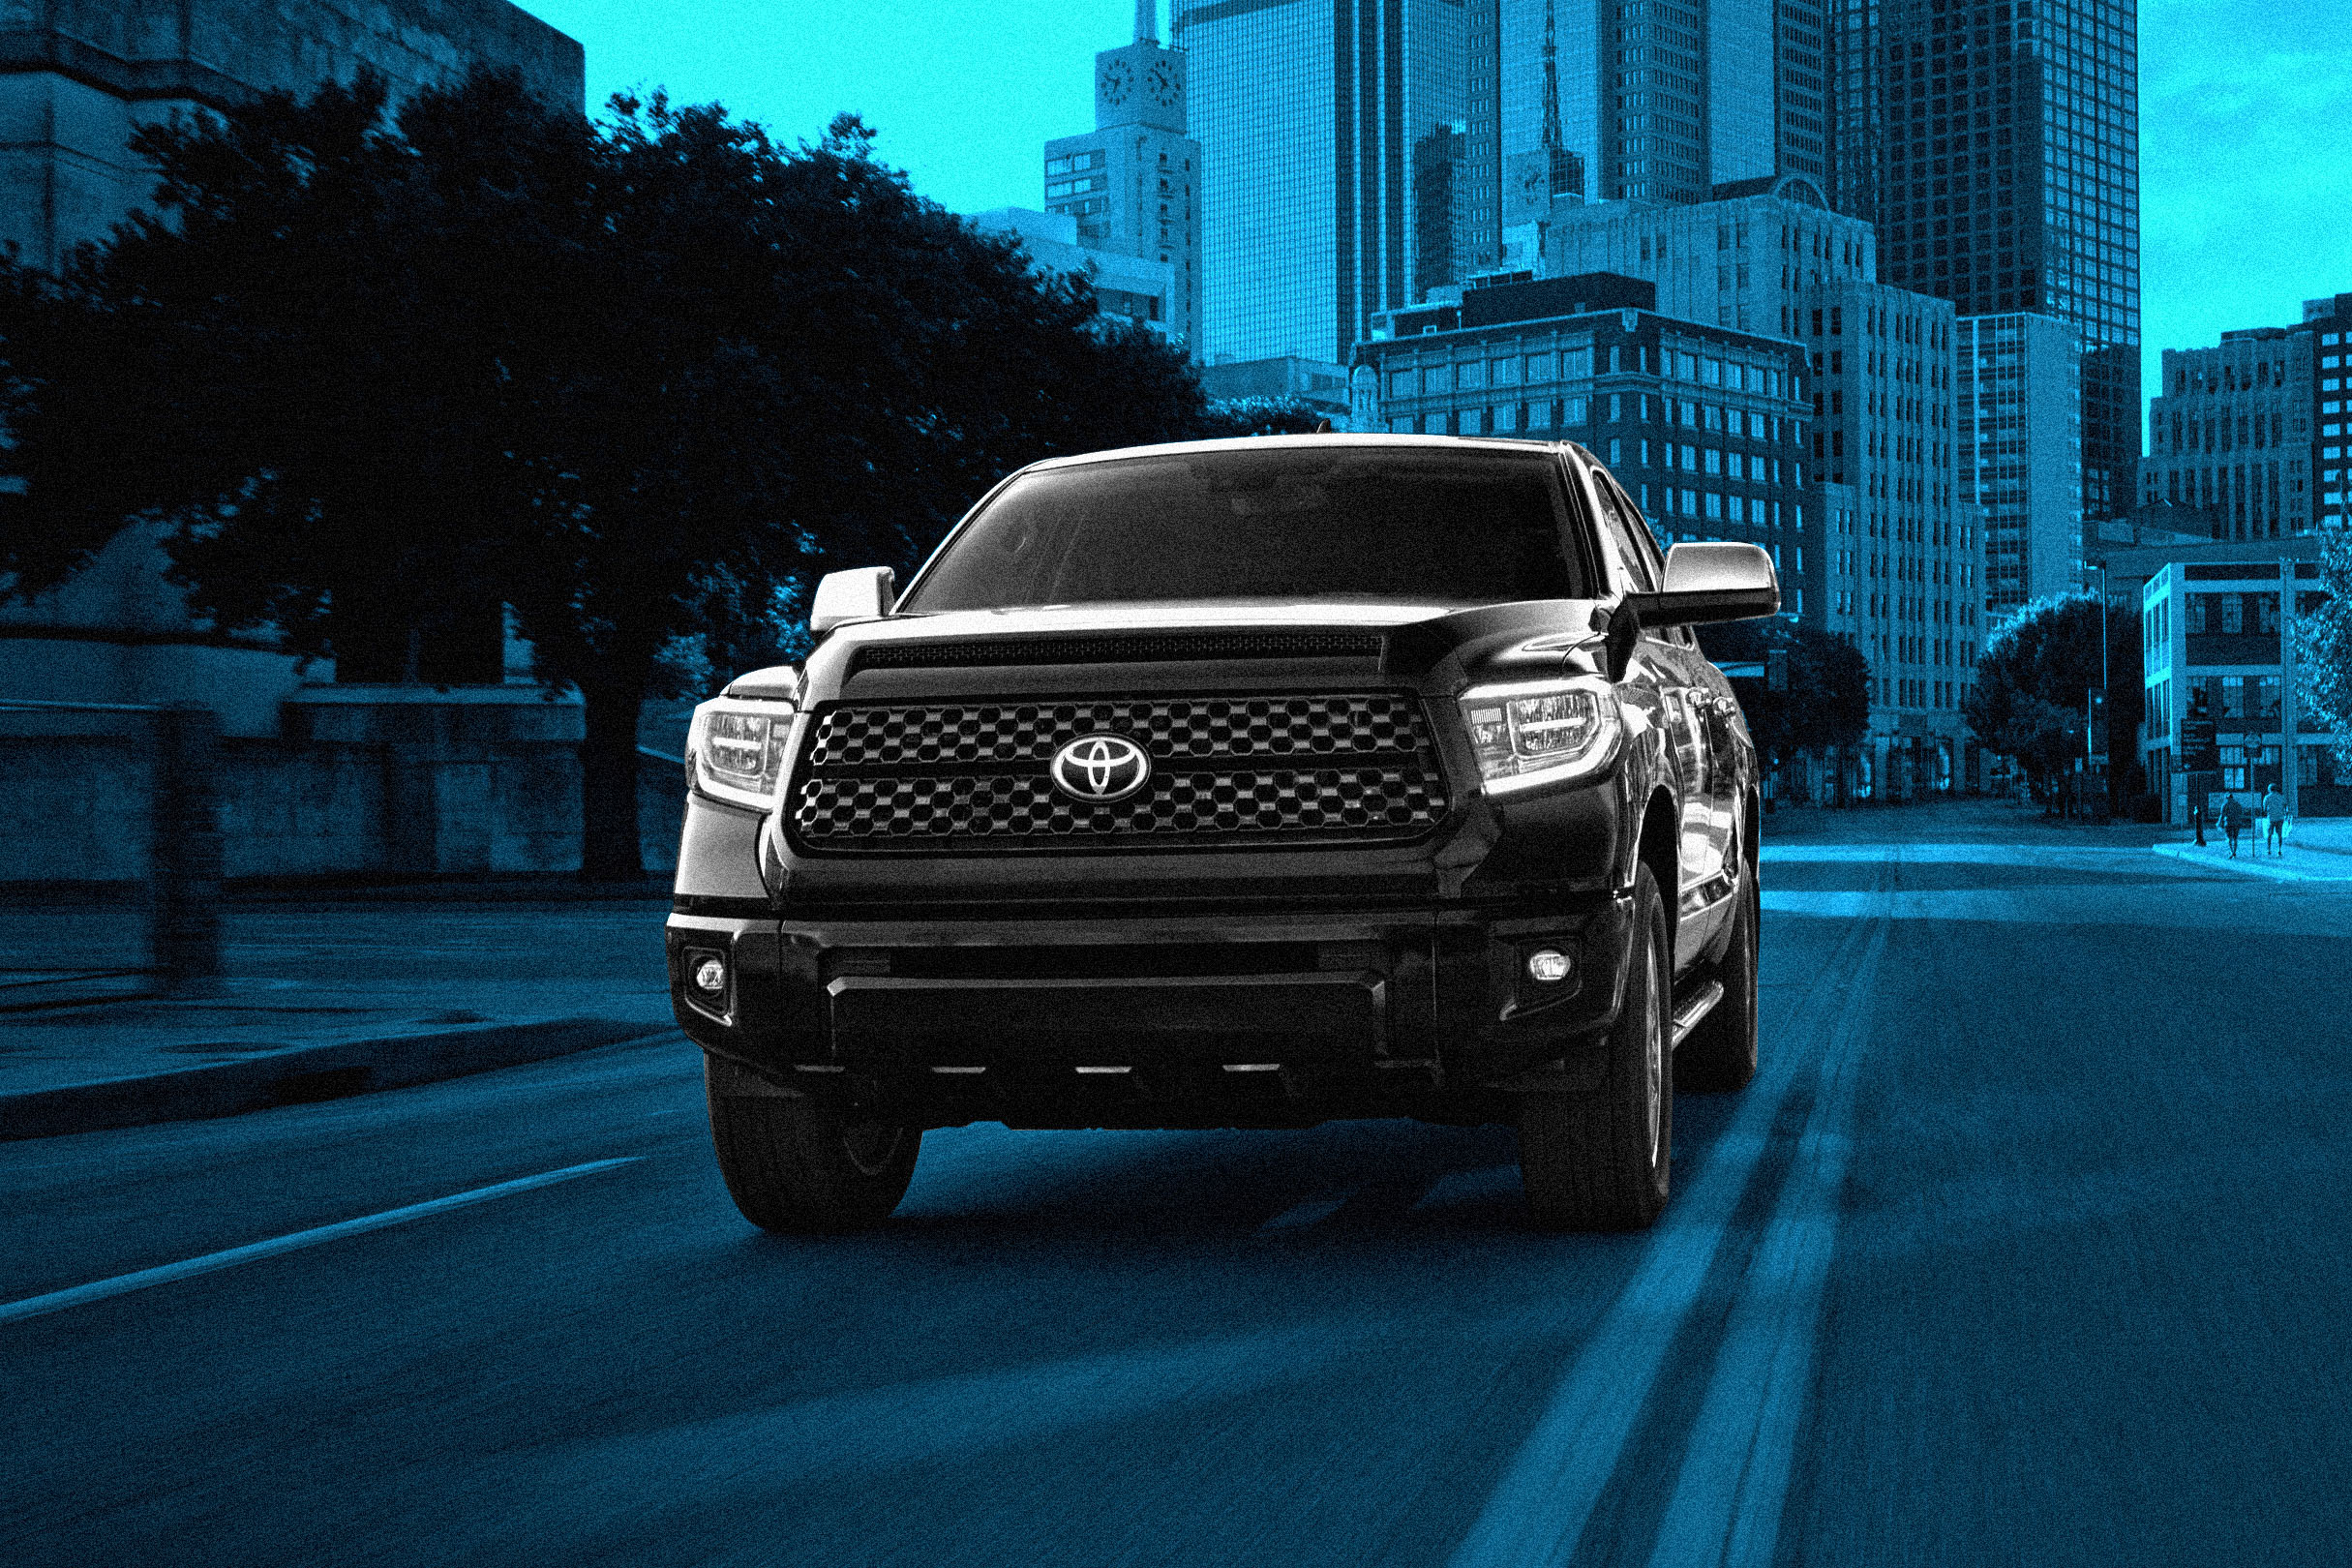 Does the Toyota Tundra work in the big city? 